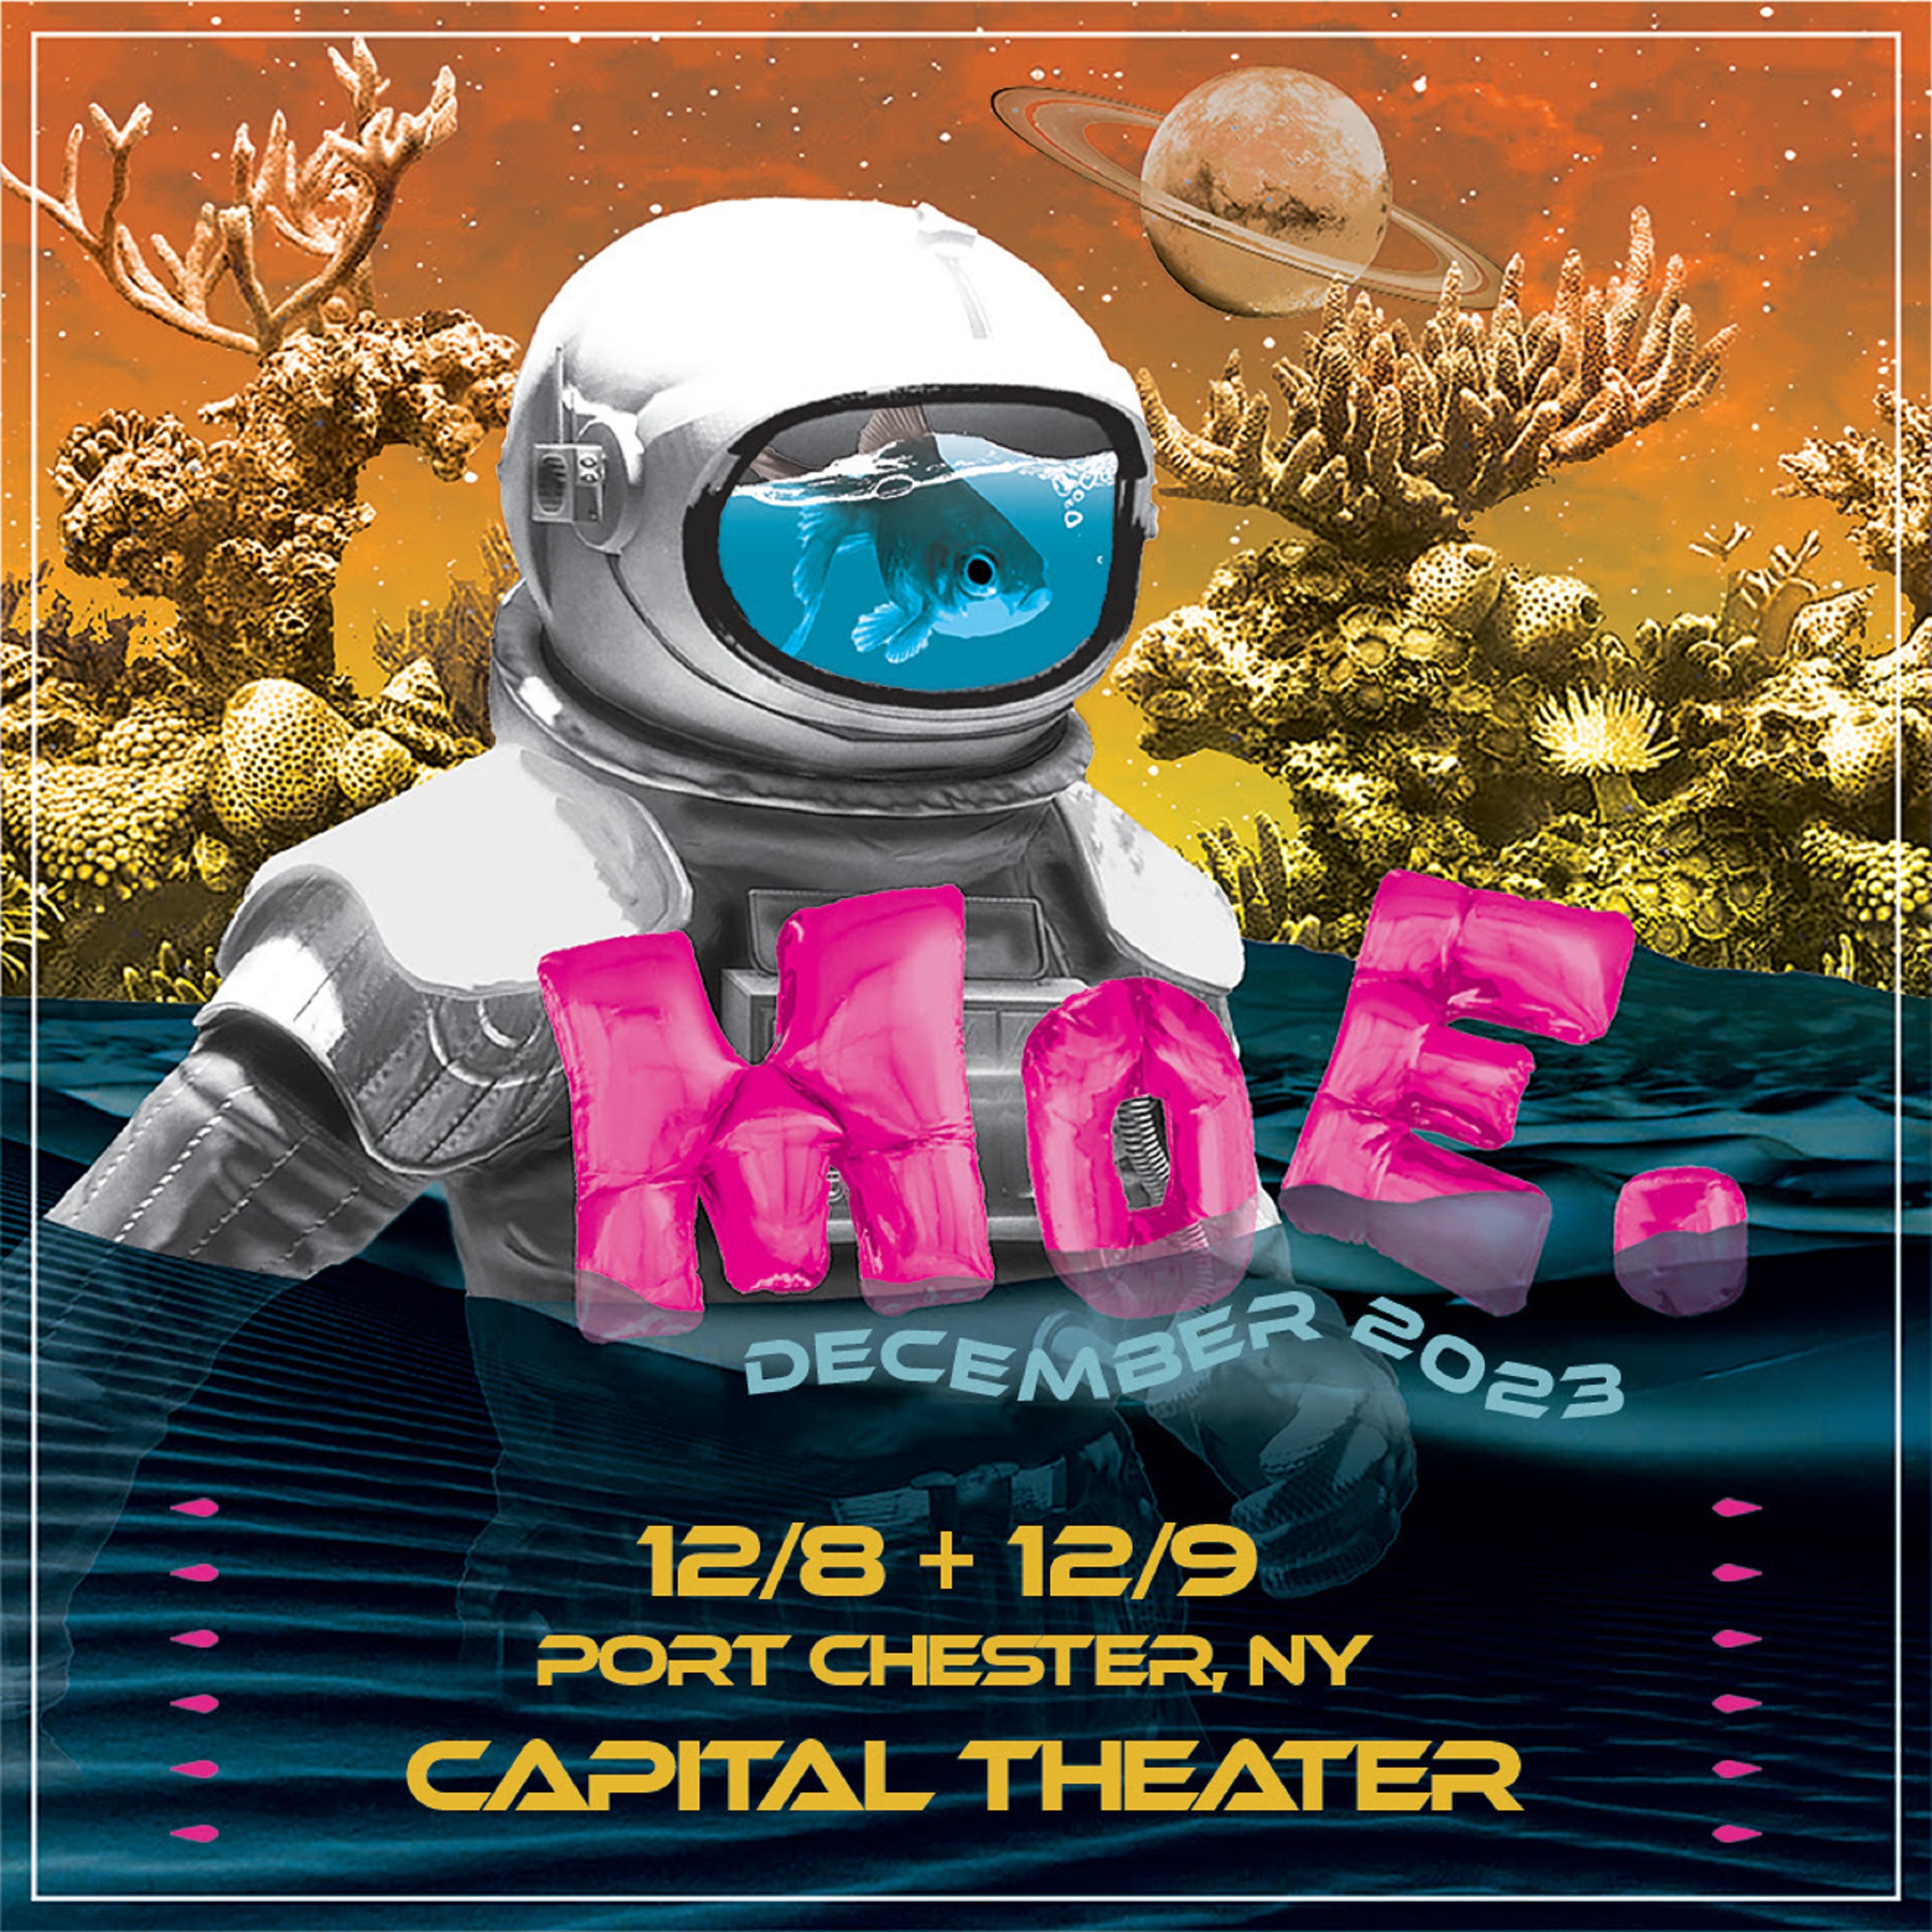 moe. Announces 2-Night Run at Capitol Theatre in Port Chester, NY